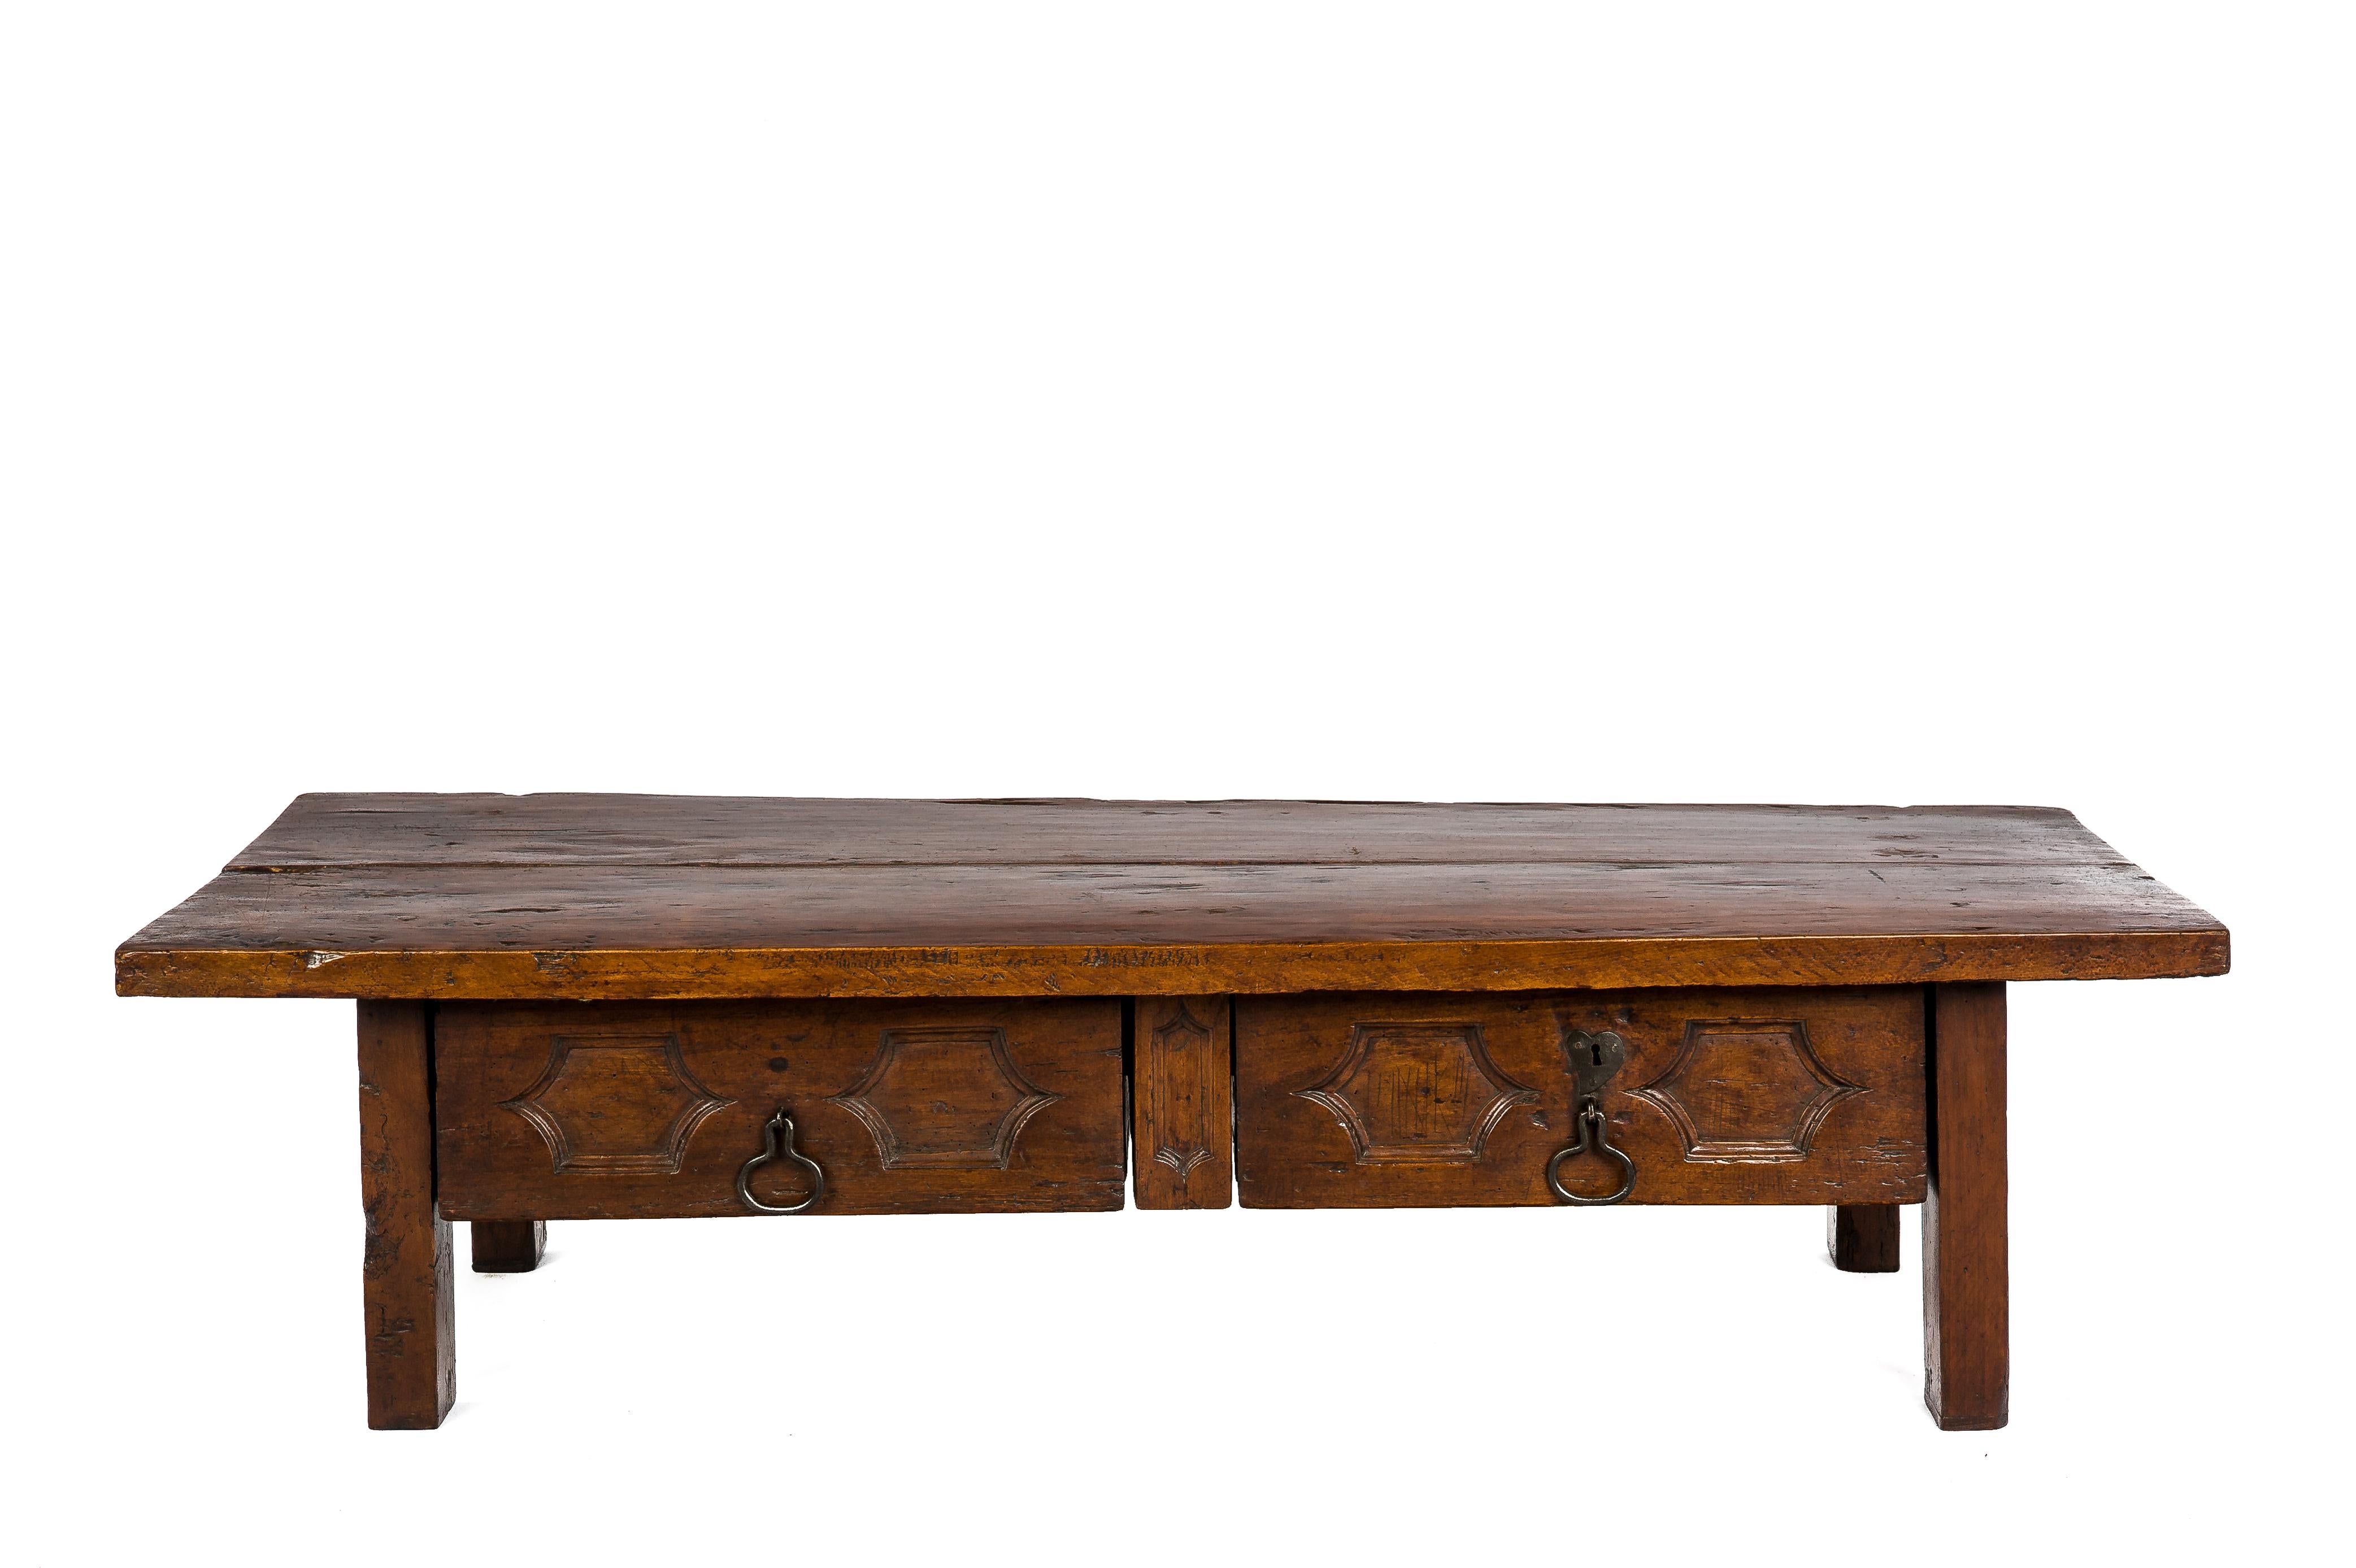 This beautiful rustic coffee table originates in Spain and dates circa 1750. 
The tabletop is made of two boards of chestnut 1,5 inches thick. The coffee table has two drawers with hand-forged steel drawer pulls. The drawer fronts are decorated